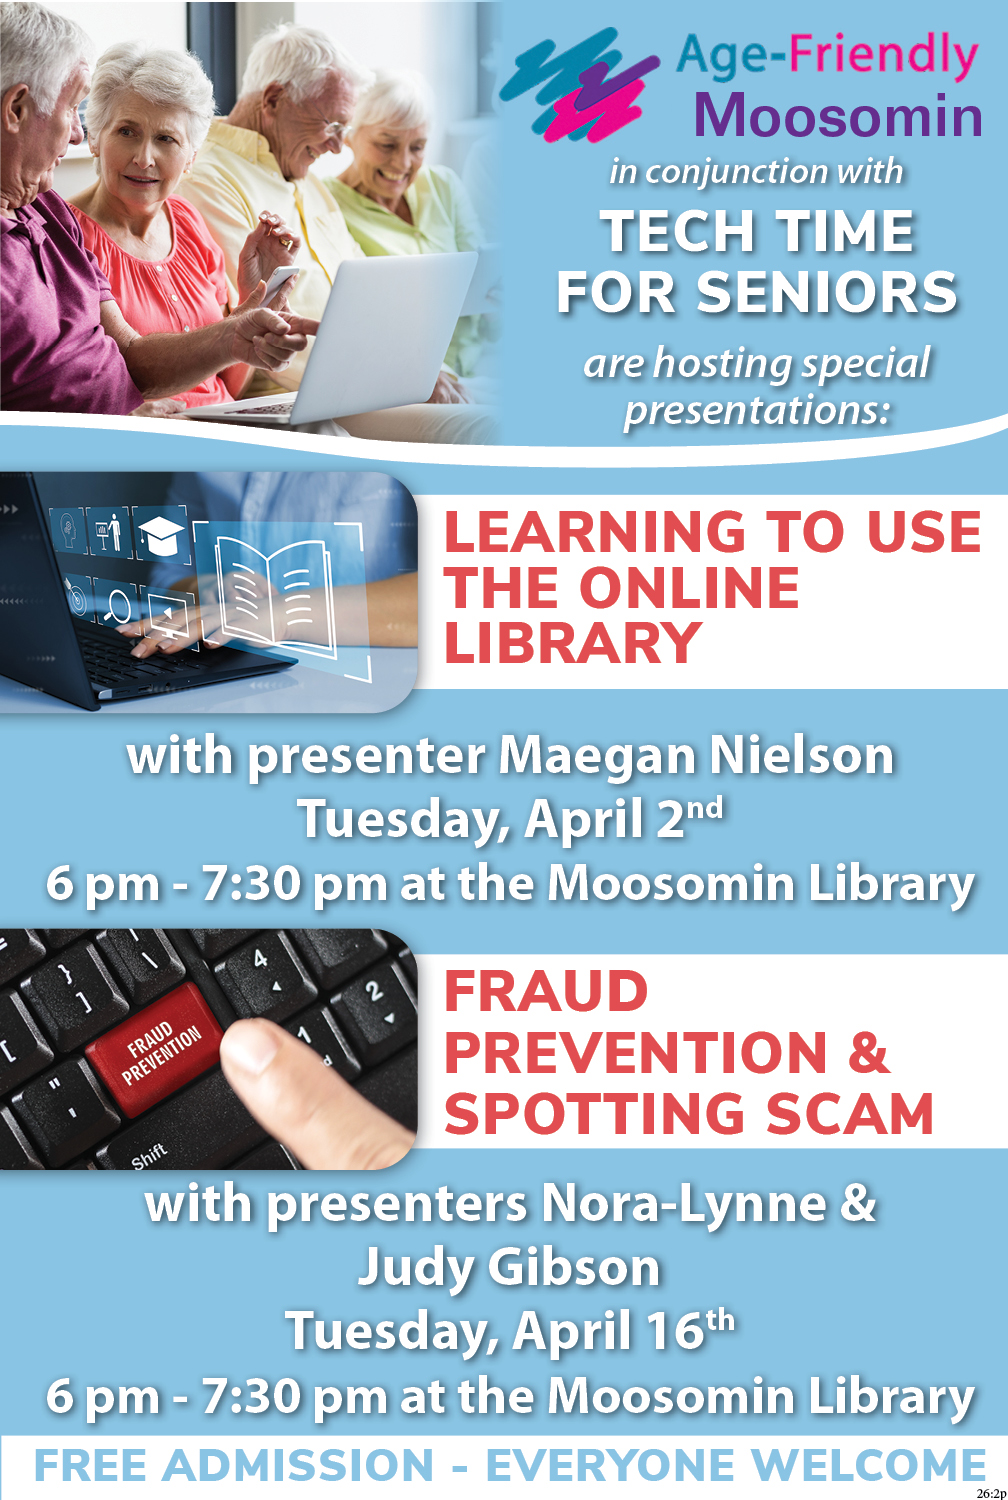 Learning to use the online library & Fraud prevention & spotting scam